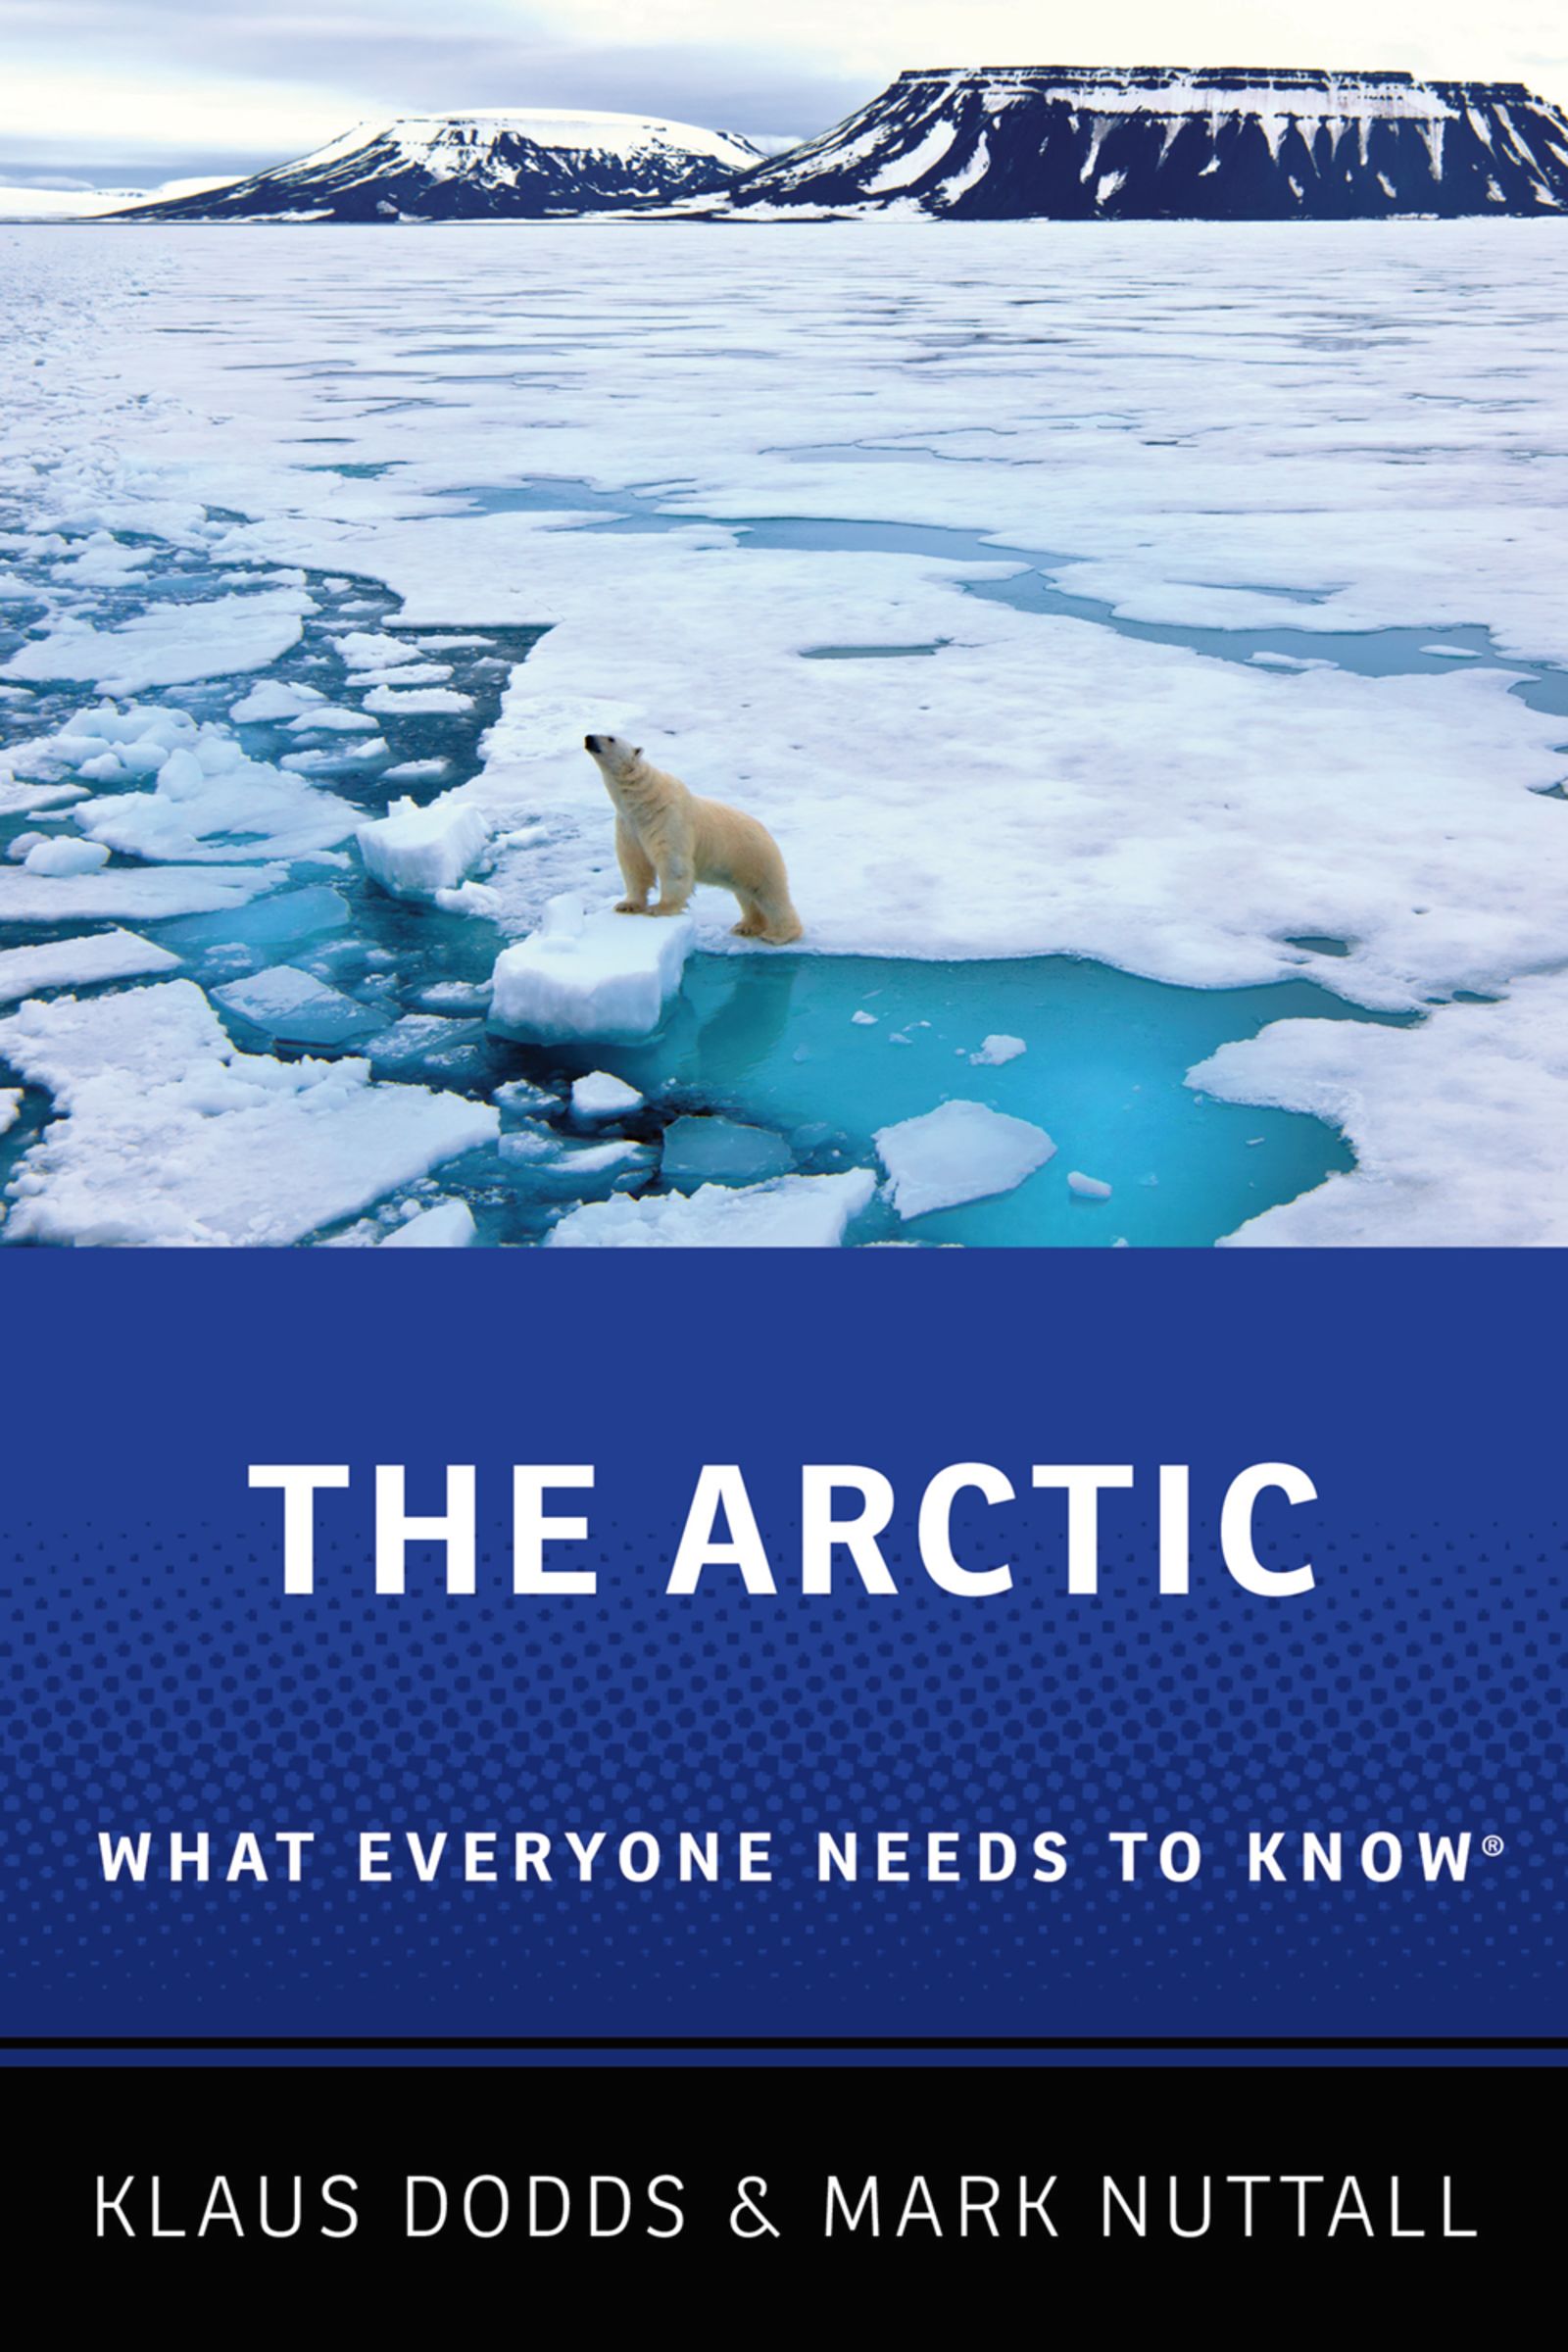 Book cover "The Arctic : What everyone needs to know".